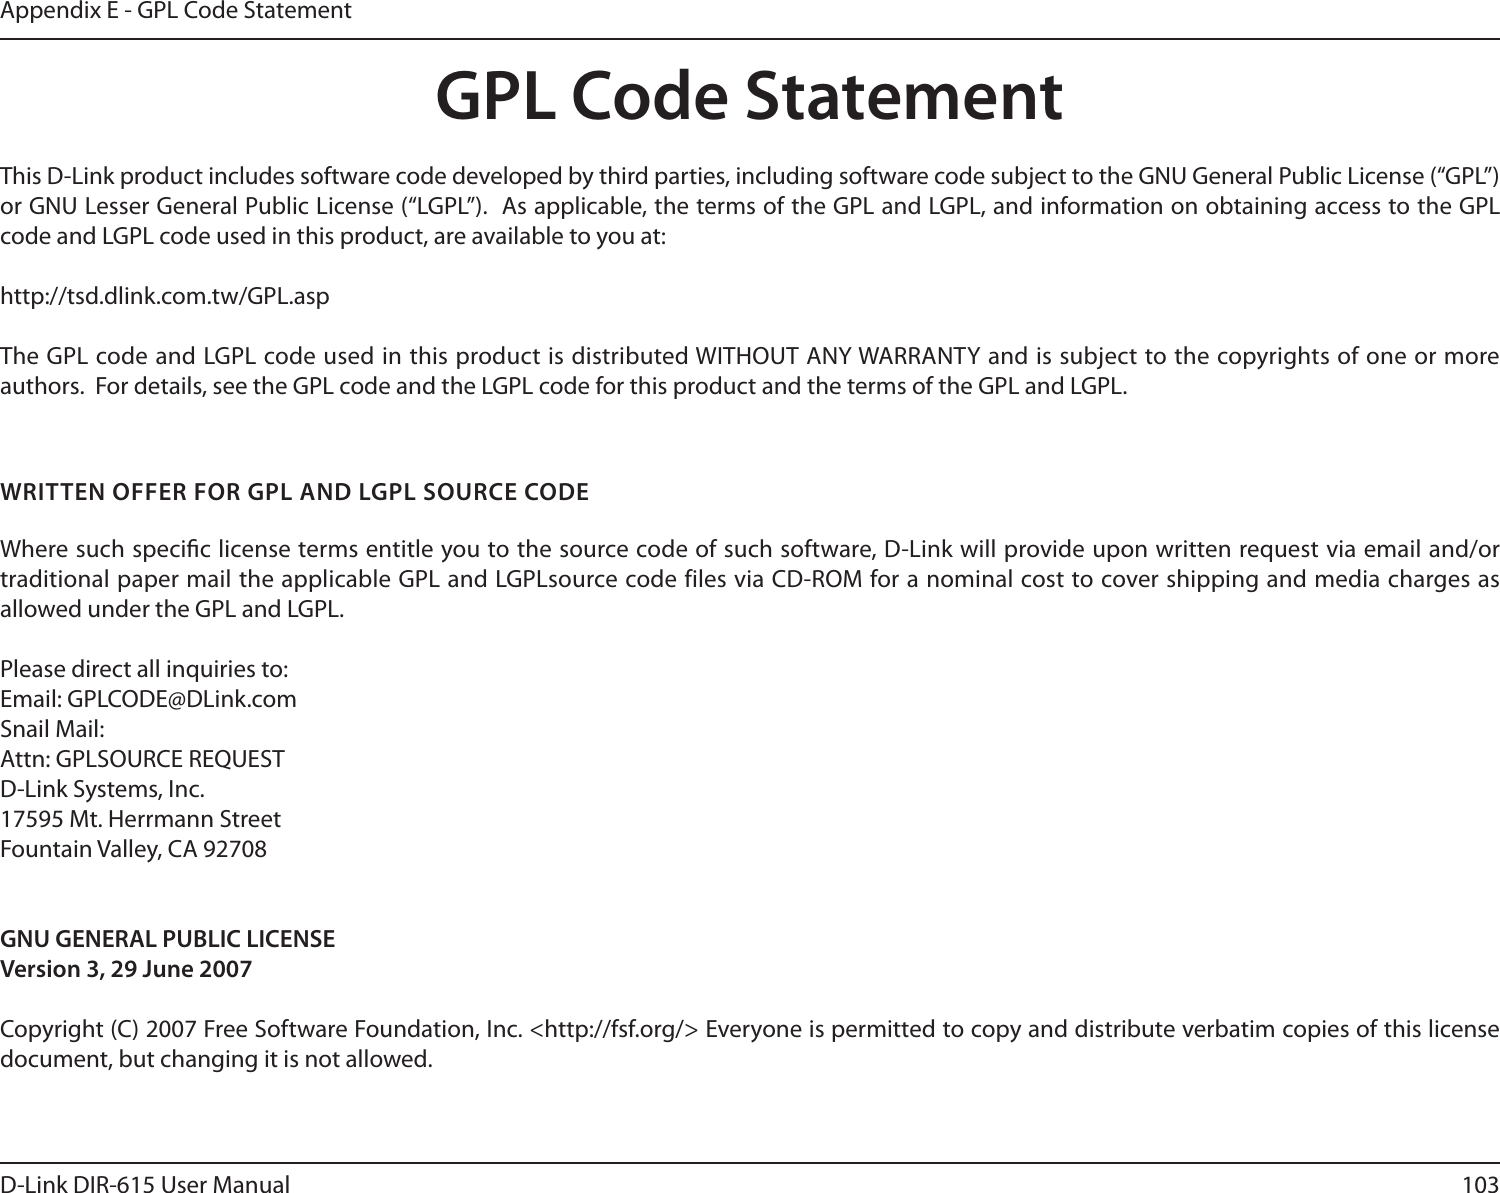 103D-Link DIR-615 User ManualAppendix E - GPL Code StatementGPL Code StatementThis D-Link product includes software code developed by third parties, including software code subject to the GNU General Public License (“GPL”) or GNU Lesser General Public License (“LGPL”).  As applicable, the terms of the GPL and LGPL, and information on obtaining access to the GPL code and LGPL code used in this product, are available to you at:http://tsd.dlink.com.tw/GPL.aspThe GPL code and LGPL code used in this product is distributed WITHOUT ANY WARRANTY and is subject to the copyrights of one or more authors.  For details, see the GPL code and the LGPL code for this product and the terms of the GPL and LGPL.WRITTEN OFFER FOR GPL AND LGPL SOURCE CODEWhere such specic license terms entitle you to the source code of such software, D-Link will provide upon written request via email and/or traditional paper mail the applicable GPL and LGPLsource code files via CD-ROM for a nominal cost to cover shipping and media charges as allowed under the GPL and LGPL.  Please direct all inquiries to:Email: GPLCODE@DLink.comSnail Mail:Attn: GPLSOURCE REQUESTD-Link Systems, Inc.17595 Mt. Herrmann StreetFountain Valley, CA 92708GNU GENERAL PUBLIC LICENSEVersion 3, 29 June 2007Copyright (C) 2007 Free Software Foundation, Inc. &lt;http://fsf.org/&gt; Everyone is permitted to copy and distribute verbatim copies of this license document, but changing it is not allowed.